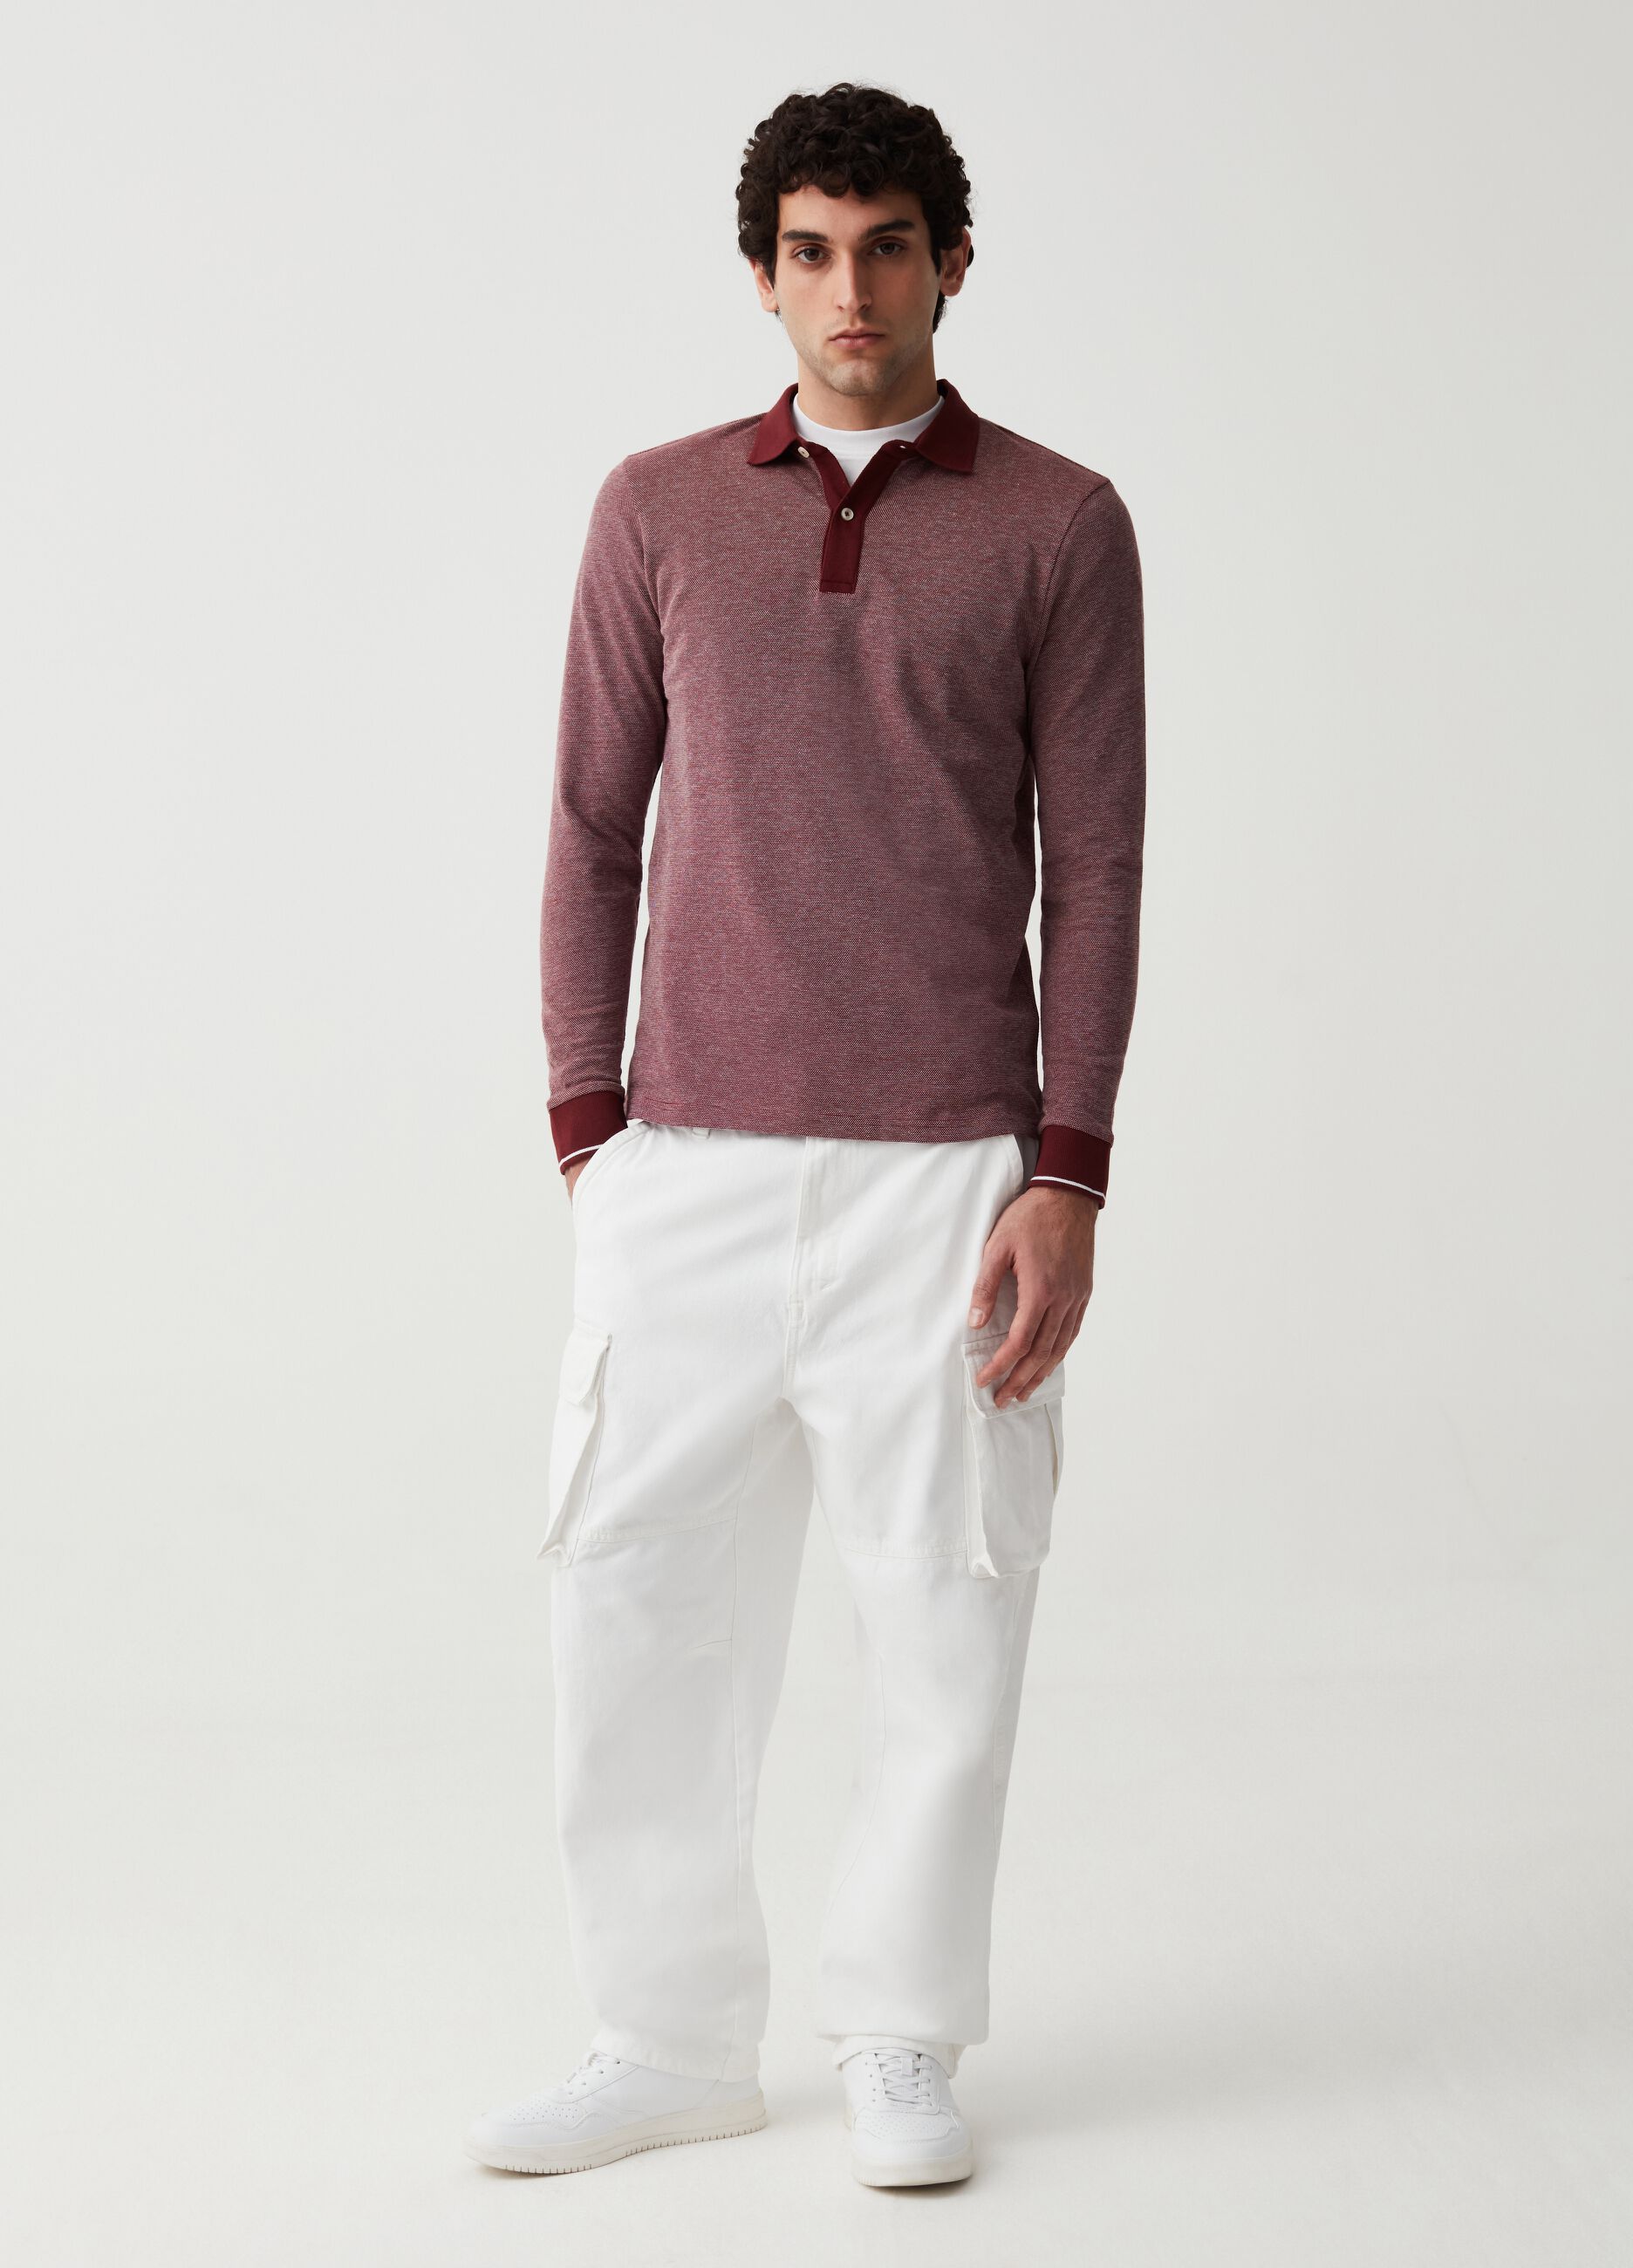 Long-sleeved polo shirt with jacquard weave